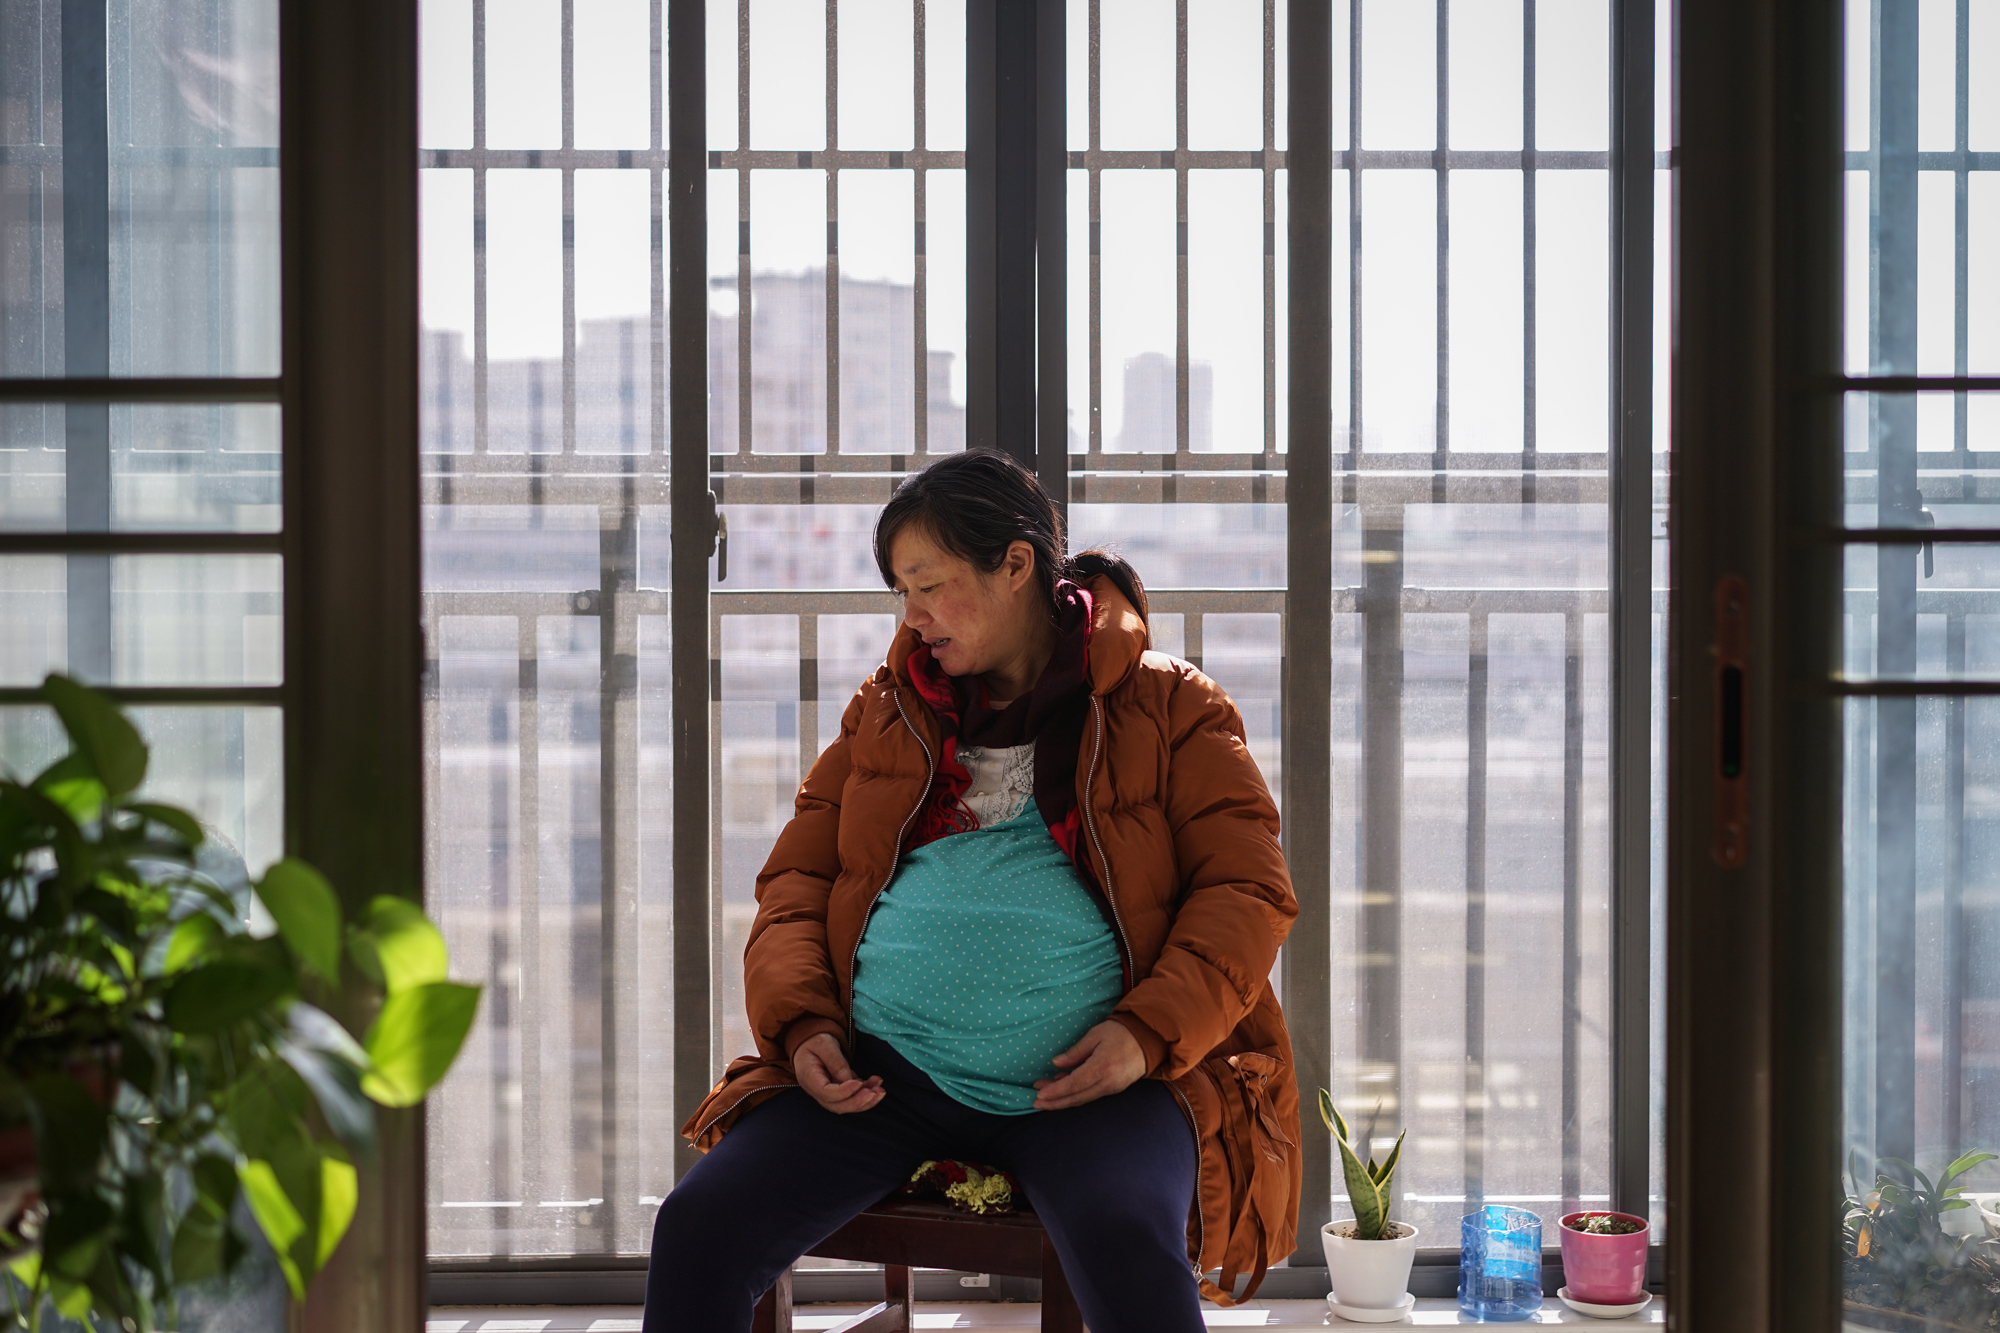 Zhiying rests at home in Suizhou, November 23, 2017. In addition to her age and emotional status, she faces another health challenge: 11 years ago, she suffered a cerebral infarction, a sudden blockage of an artery in her brain. IVF and pregnancy can increase the chance of blood clotting, which can be life-threatening. 